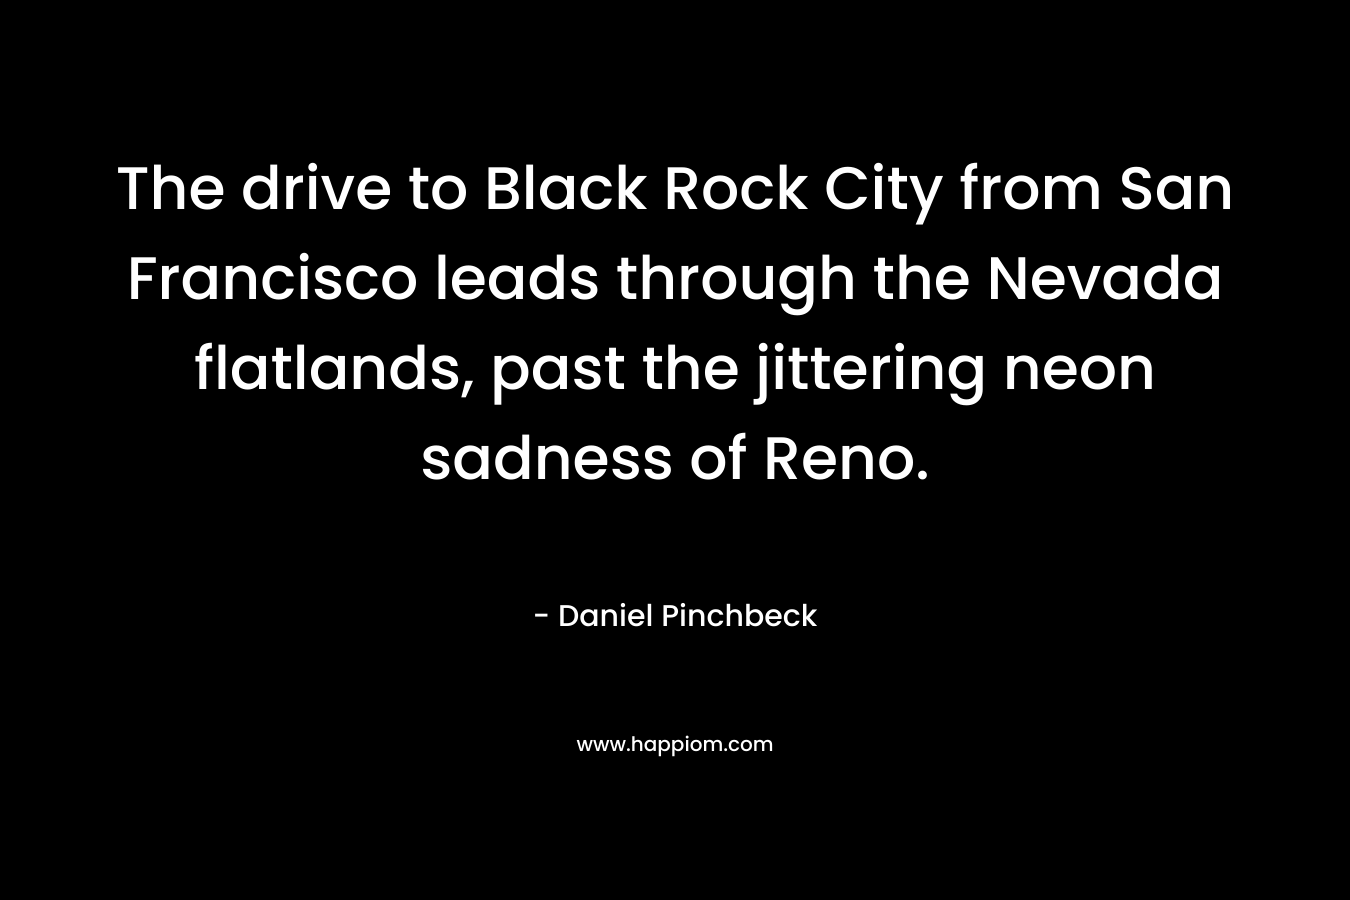 The drive to Black Rock City from San Francisco leads through the Nevada flatlands, past the jittering neon sadness of Reno. – Daniel Pinchbeck